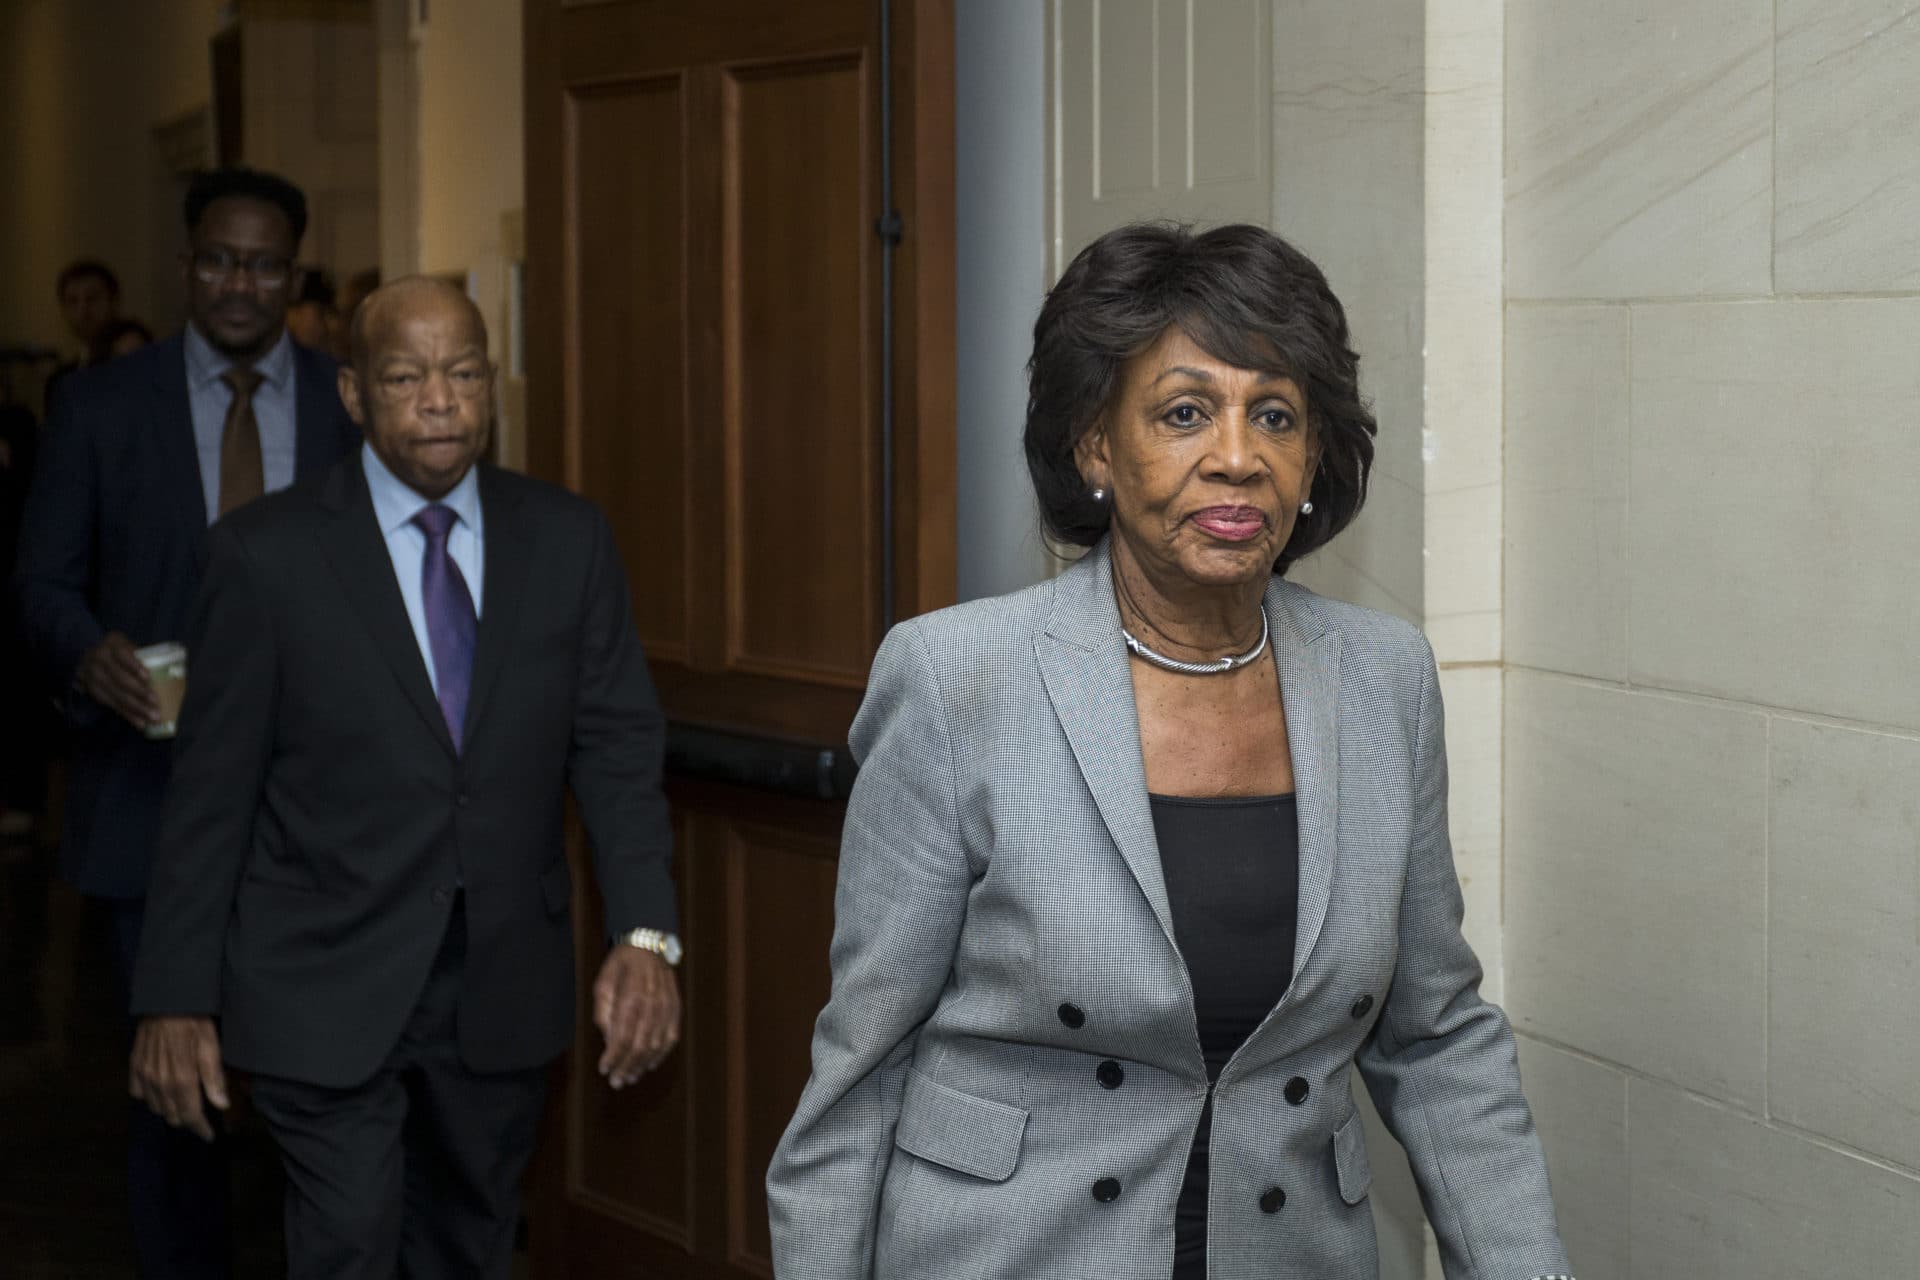 Rep. Maxine Waters Still Isn’t Here For Trump’s SOTU Address, While Other Democrats Remain Cautiously Hopeful